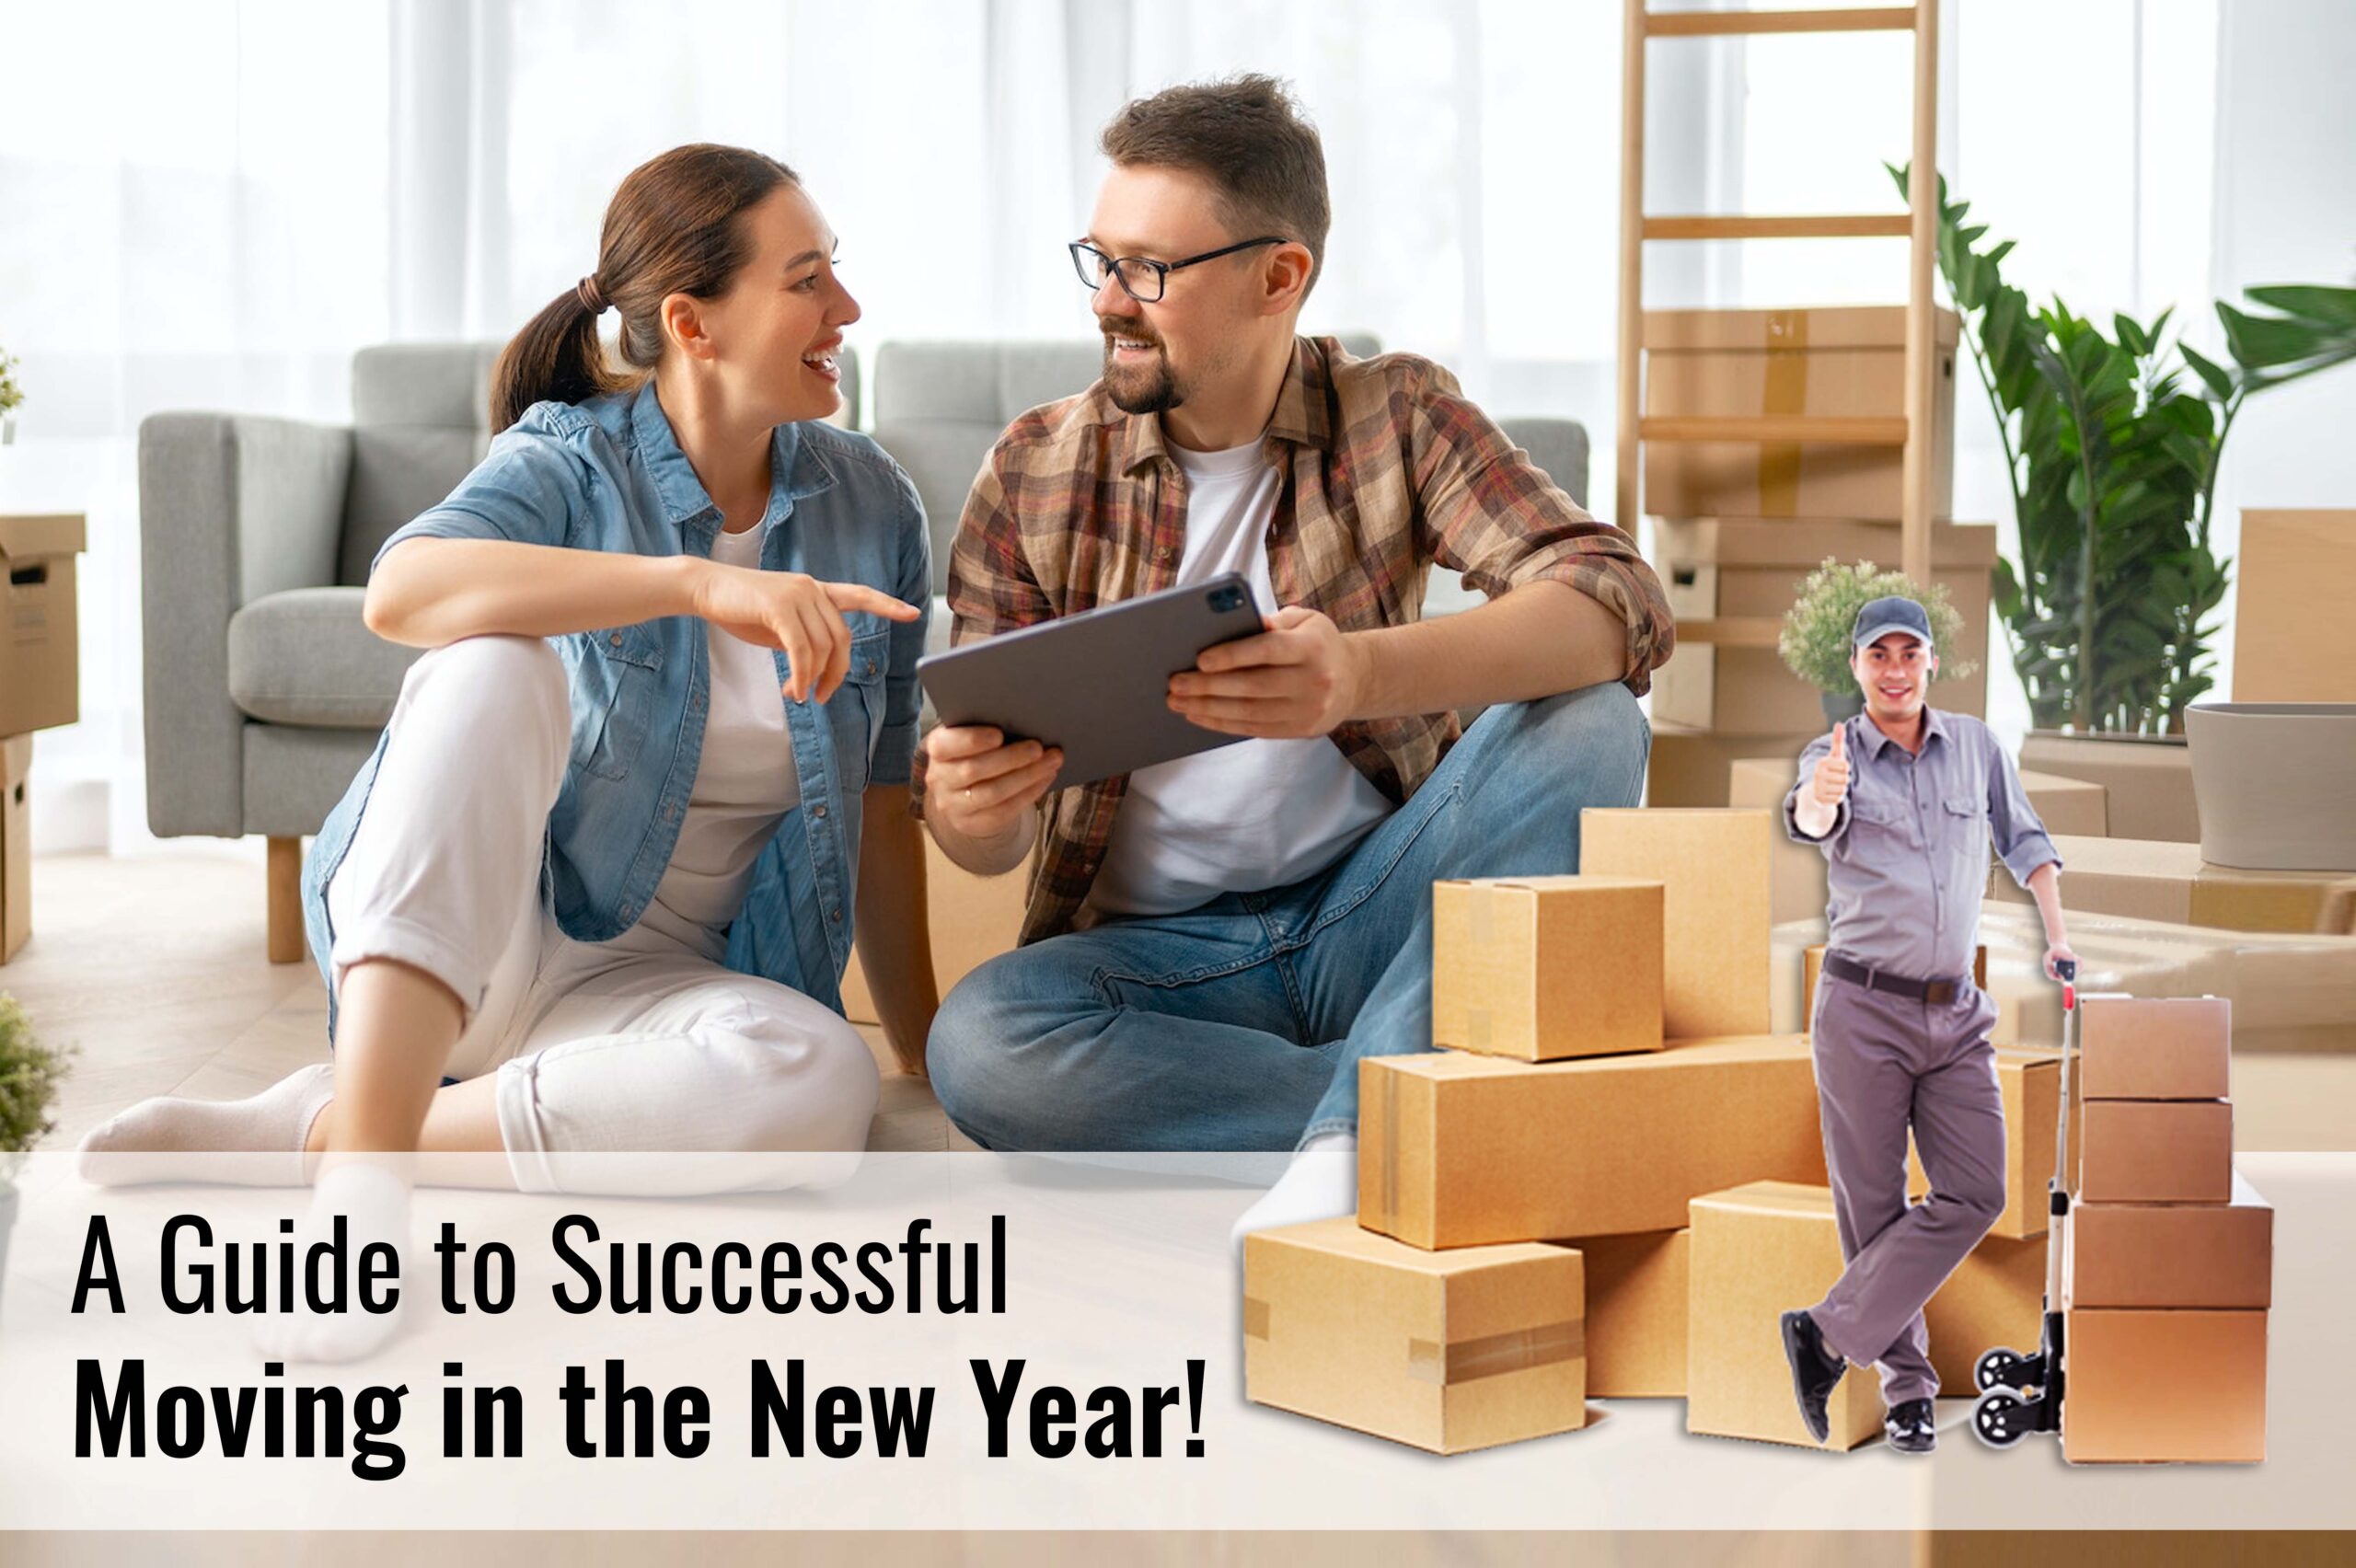 A guide to successful moving in New Year